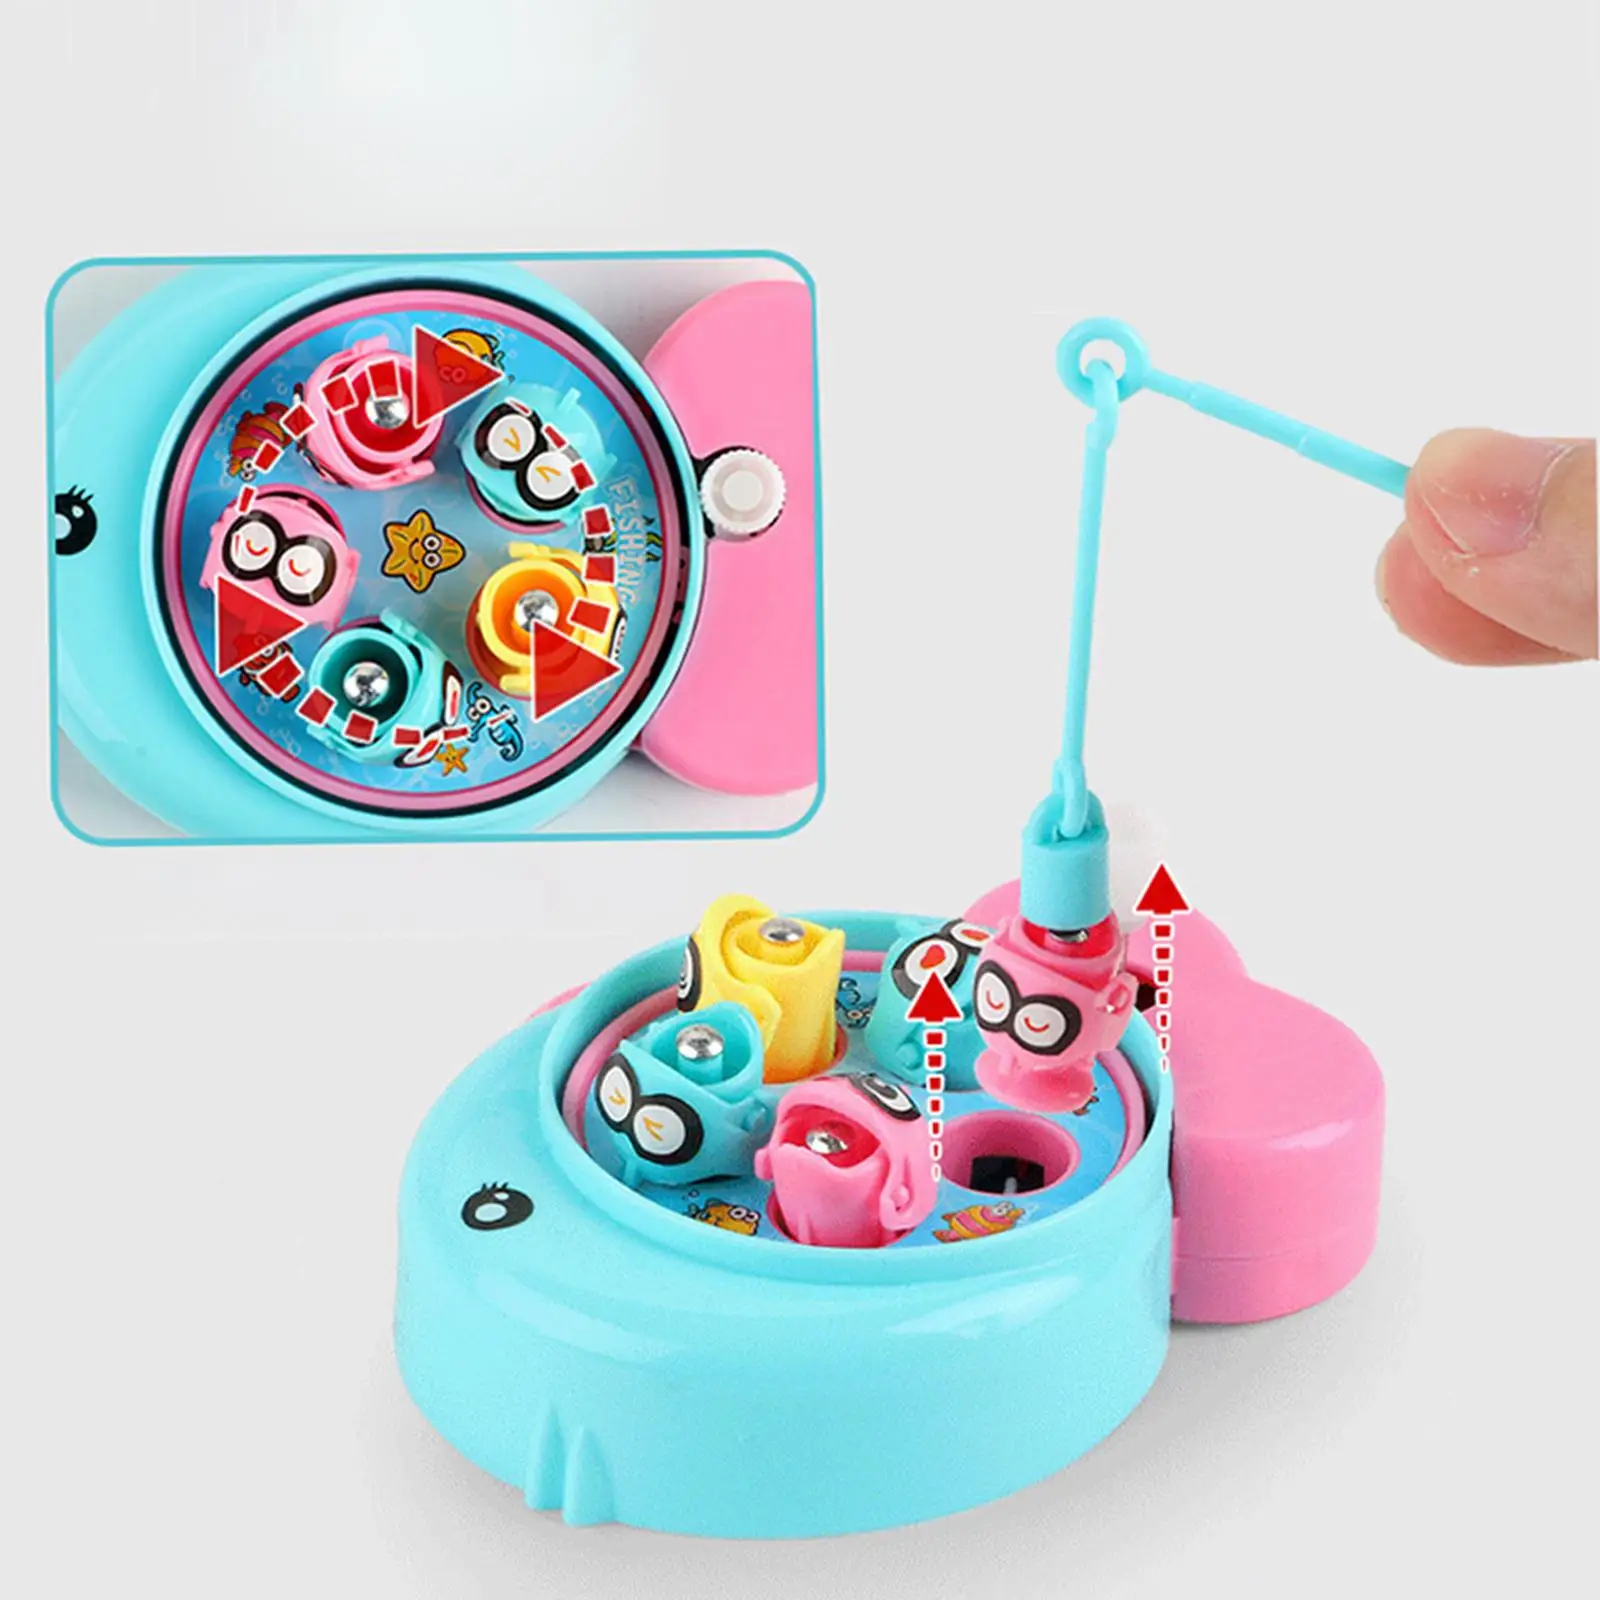 Portable Fishing Game Motor Skills Early Educational Toys Clock Toy for 3 4 5 Year Old Children Kids Birthday Gifts